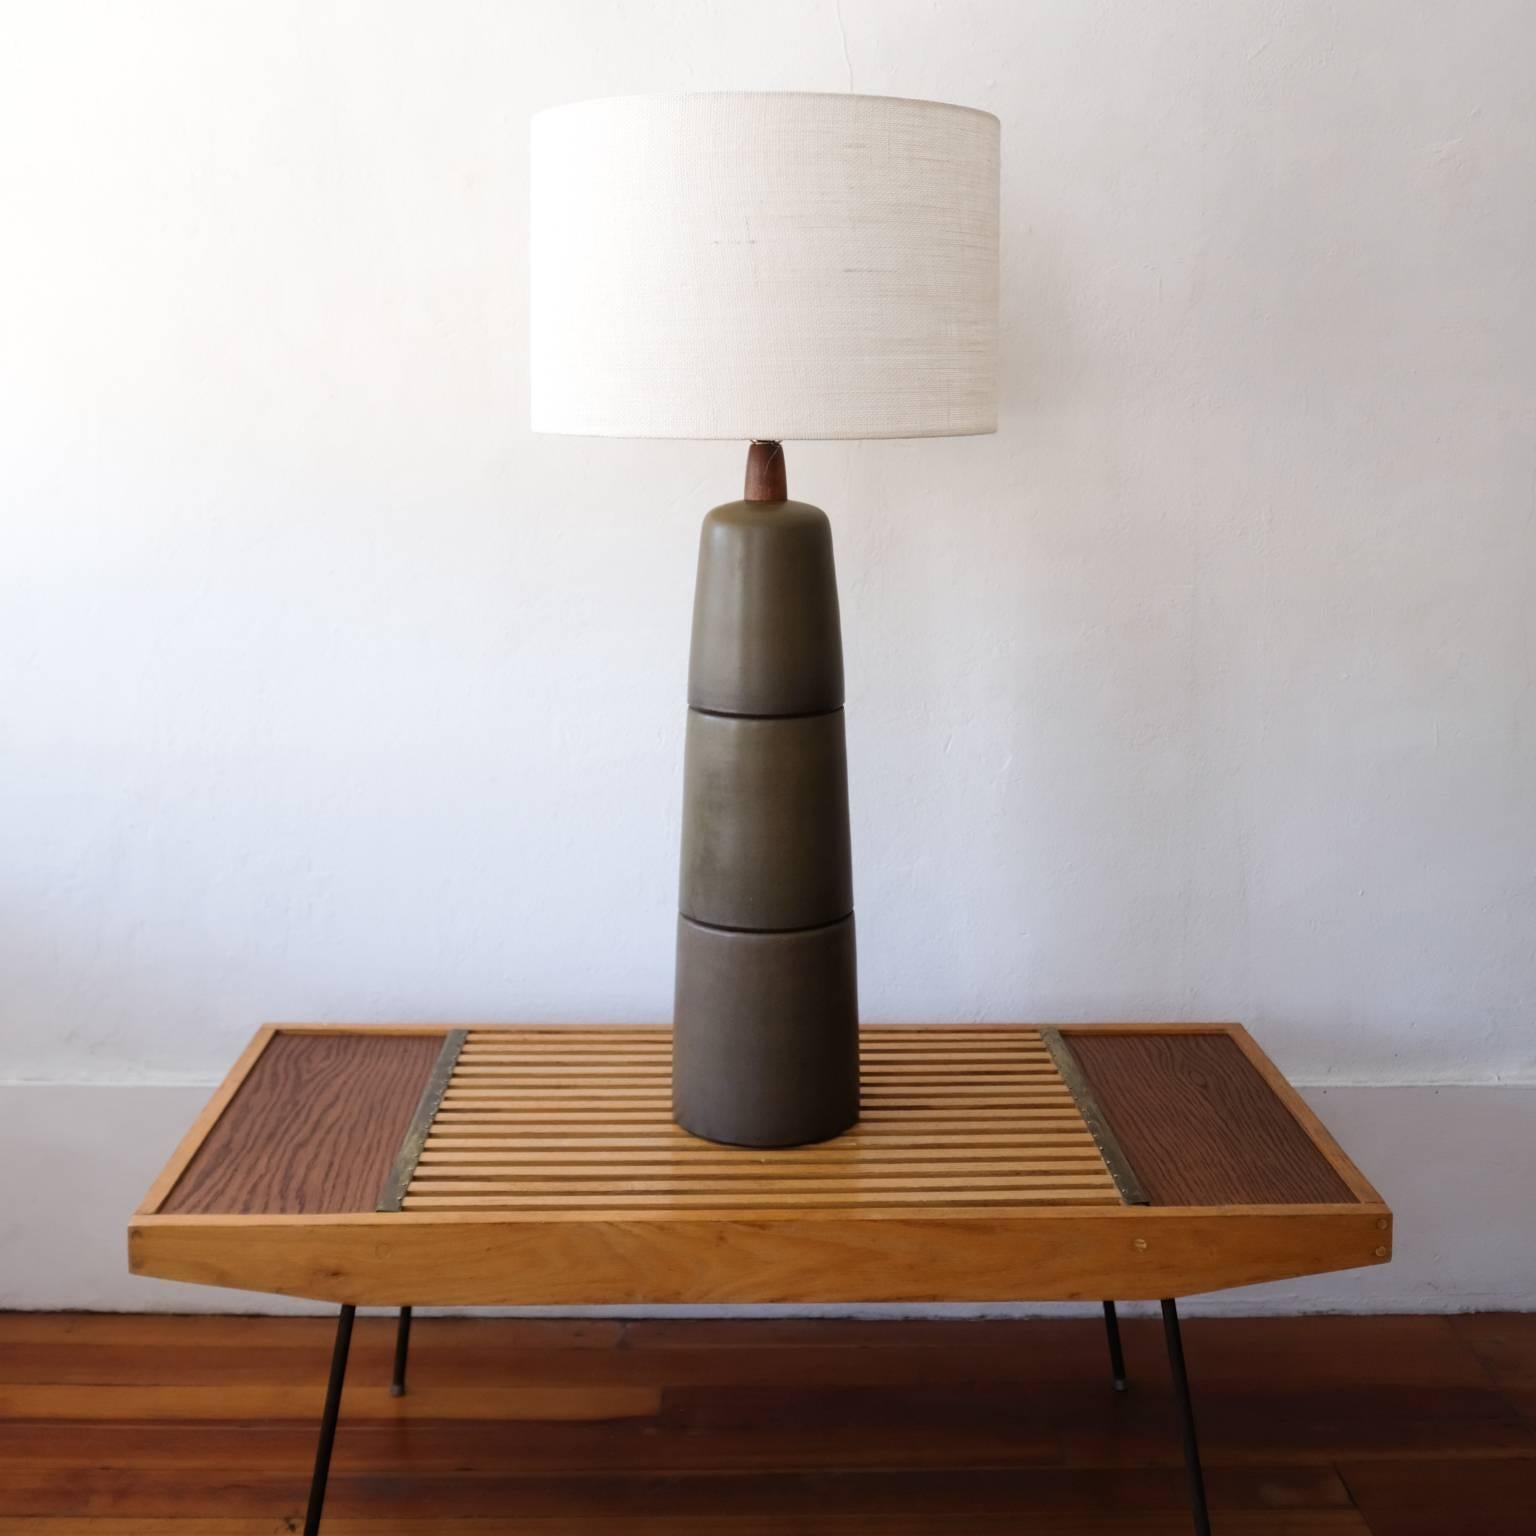 Monumental ceramic table lamp by Jane and Gordon Martz for their company, Marshall Studios. Segmented triple stack design with a dark olive glaze. Incredibly large original walnut finial. Signed in the clay and includes a Marshall Studios label. New